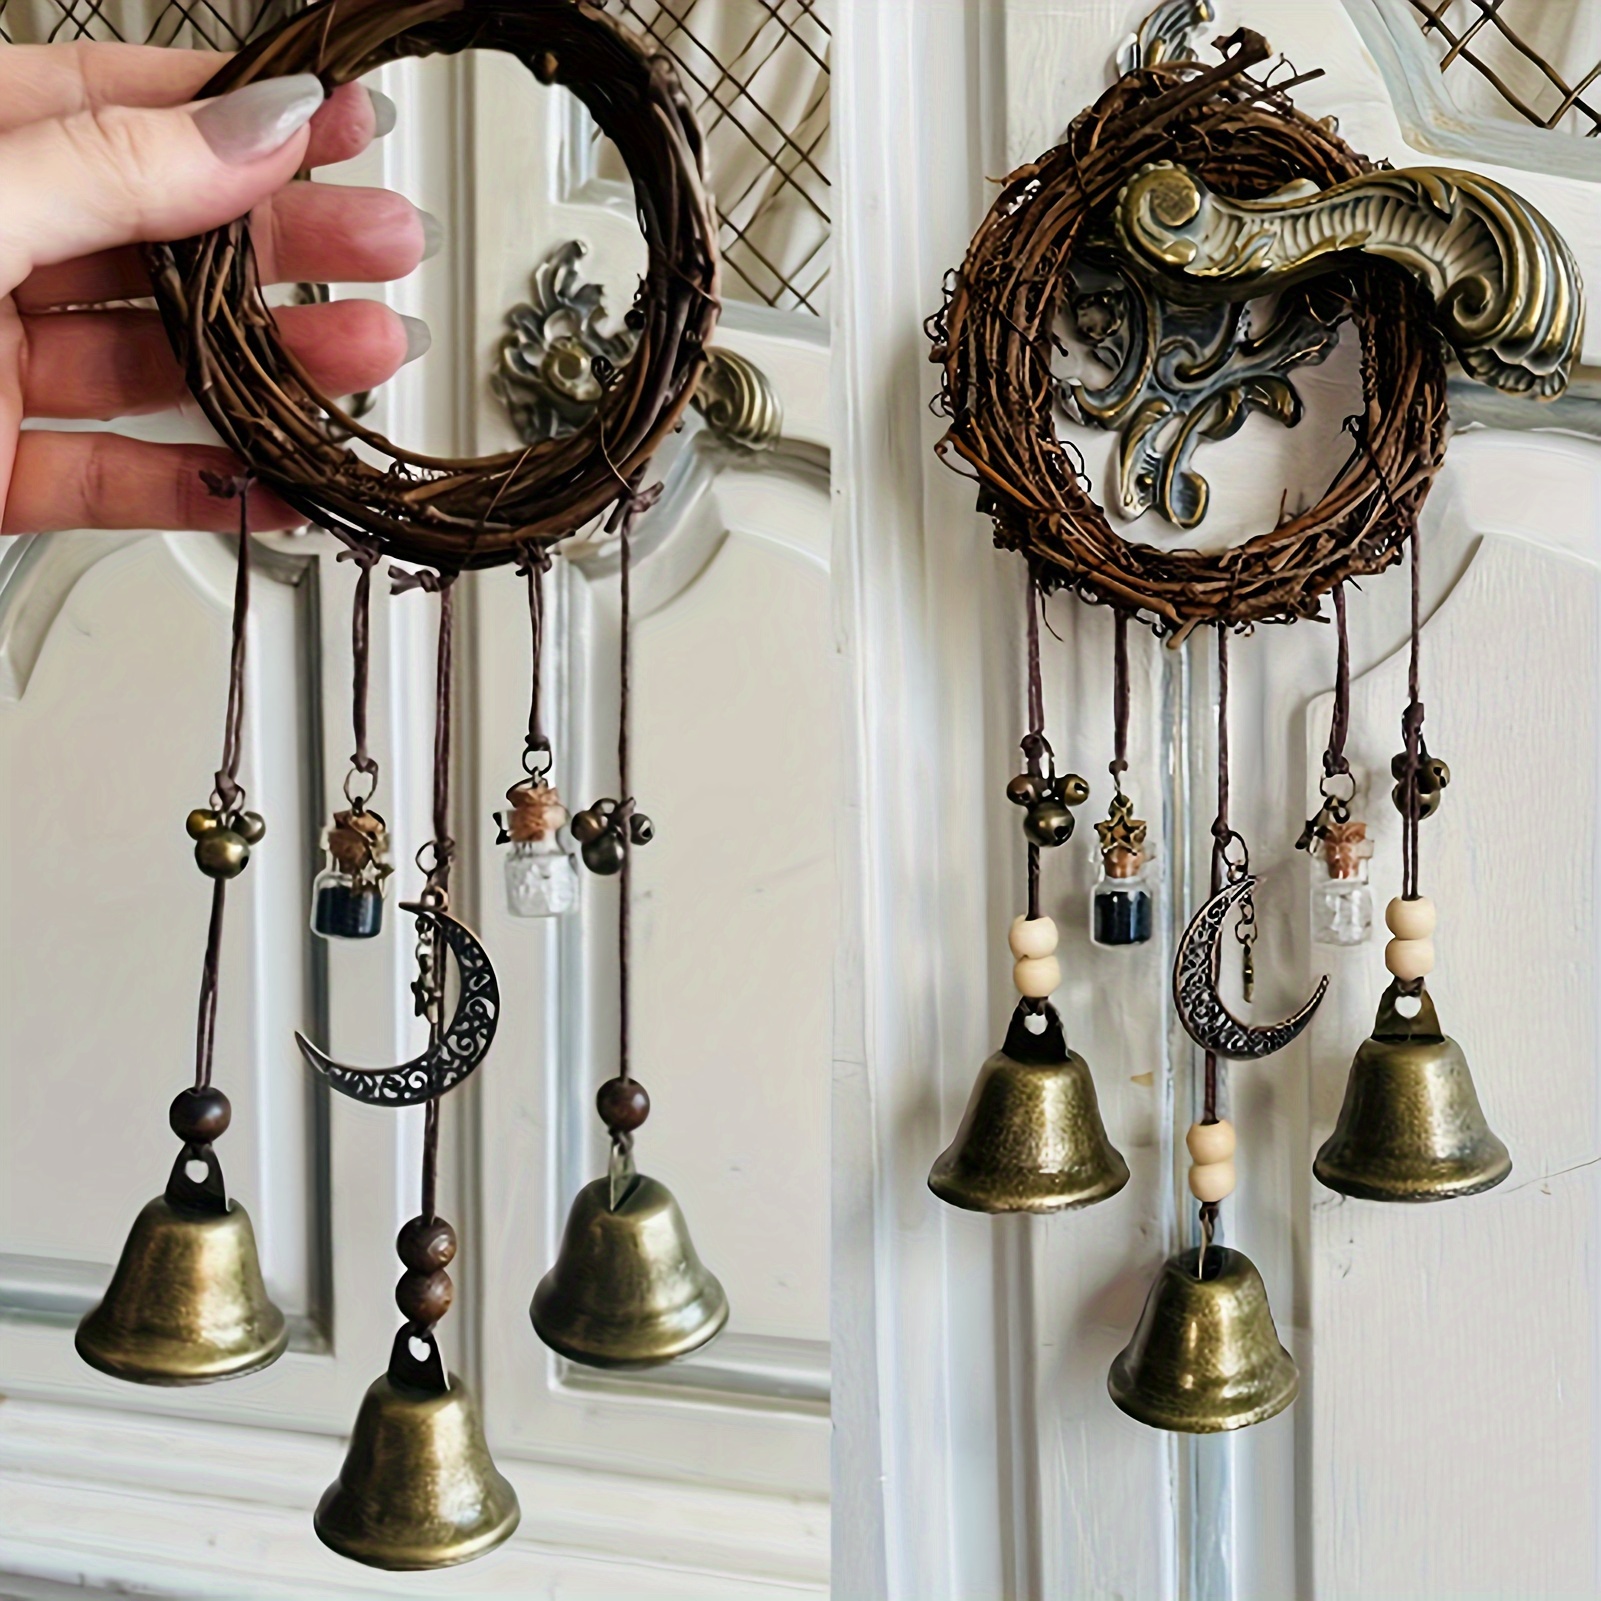 

Bell Wind Chime - Perfect For Home & Outdoor Decor, Adds A Touch Of Magic To Any Space